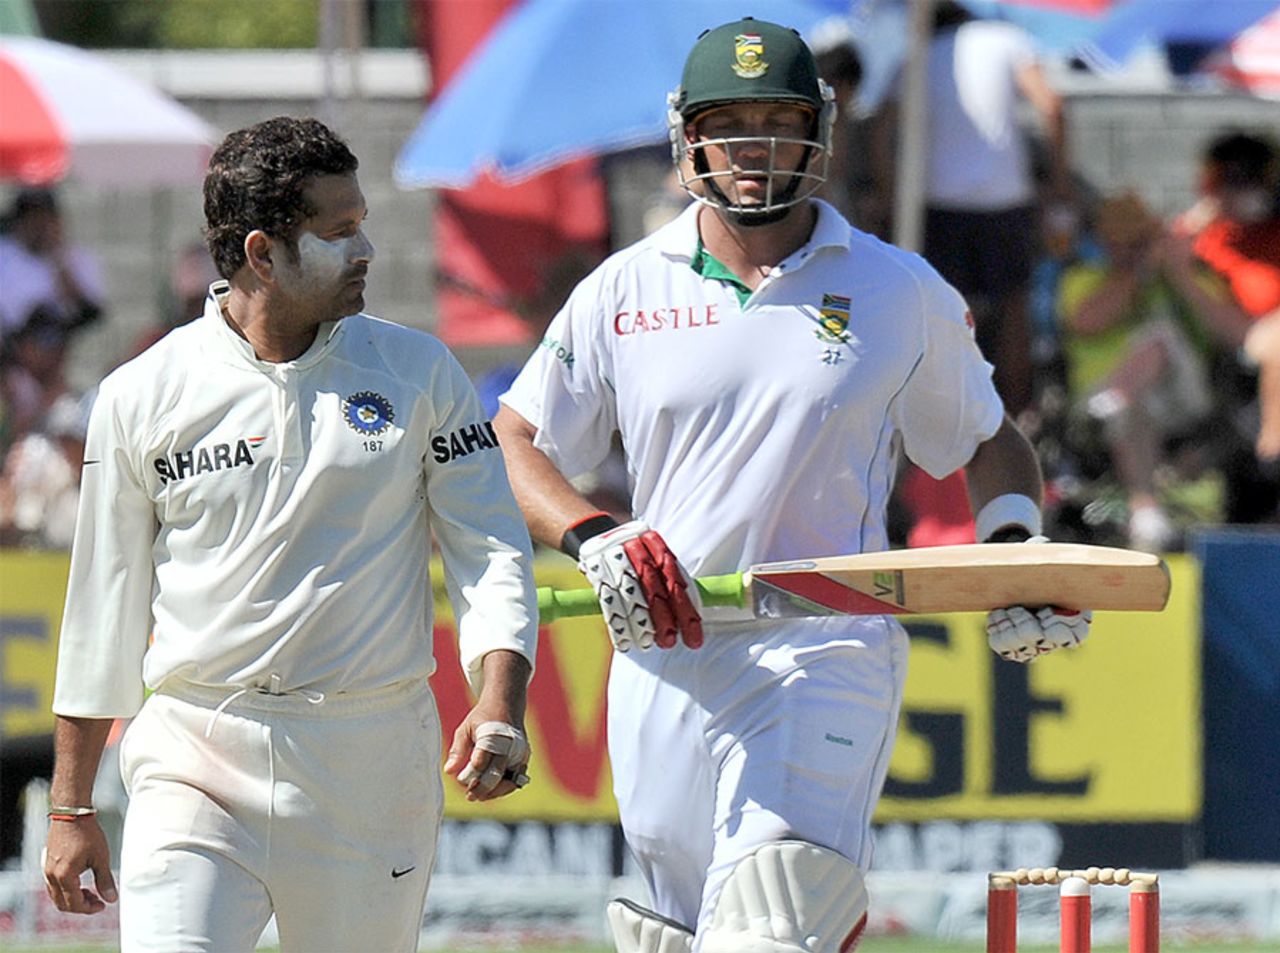 Sachin Tendulkar looks on as Jacques Kallis completes a single, South Africa v India, 3rd Test, Cape Town, 4th day, January 5, 2011